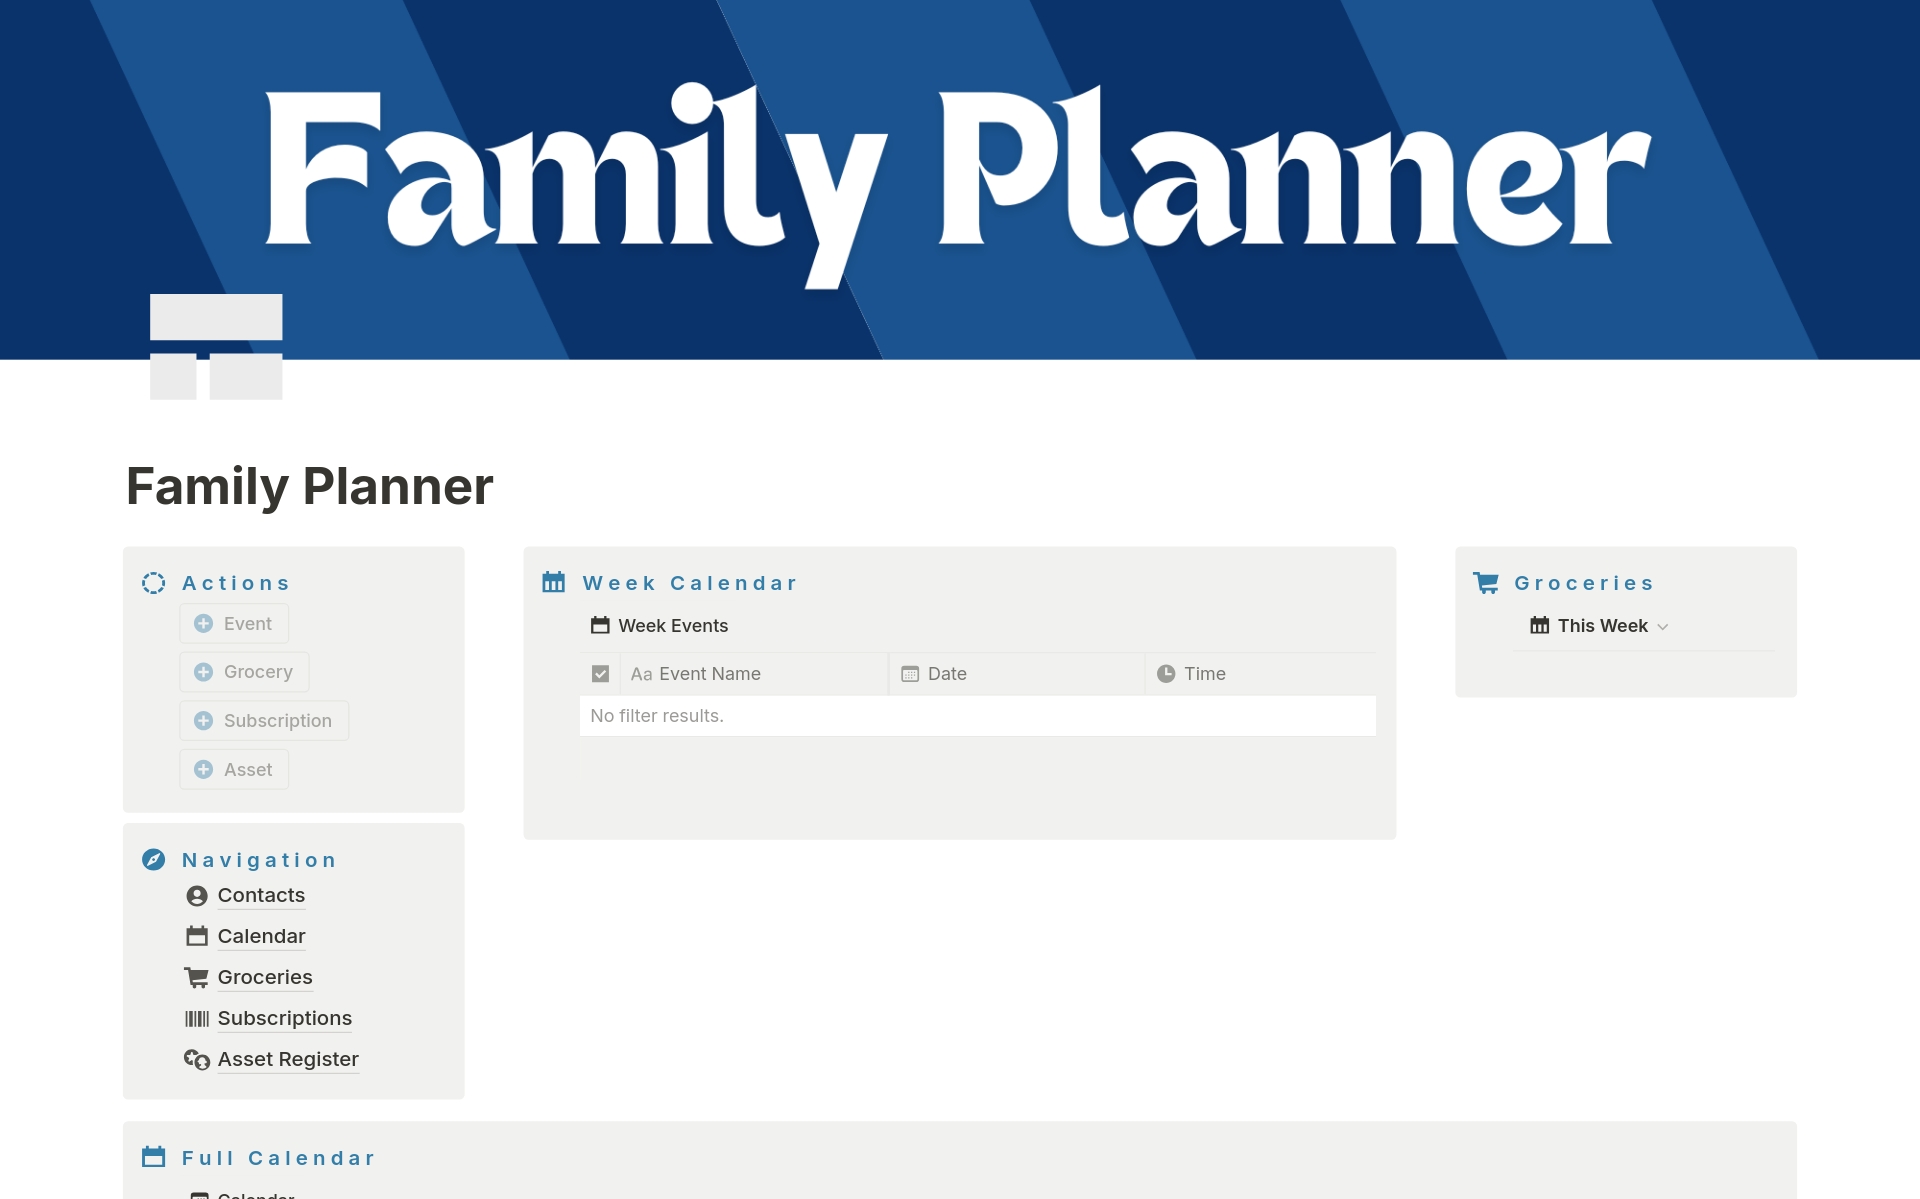 A family planner for keeping track of calendar events, subscriptions, assets and more. 